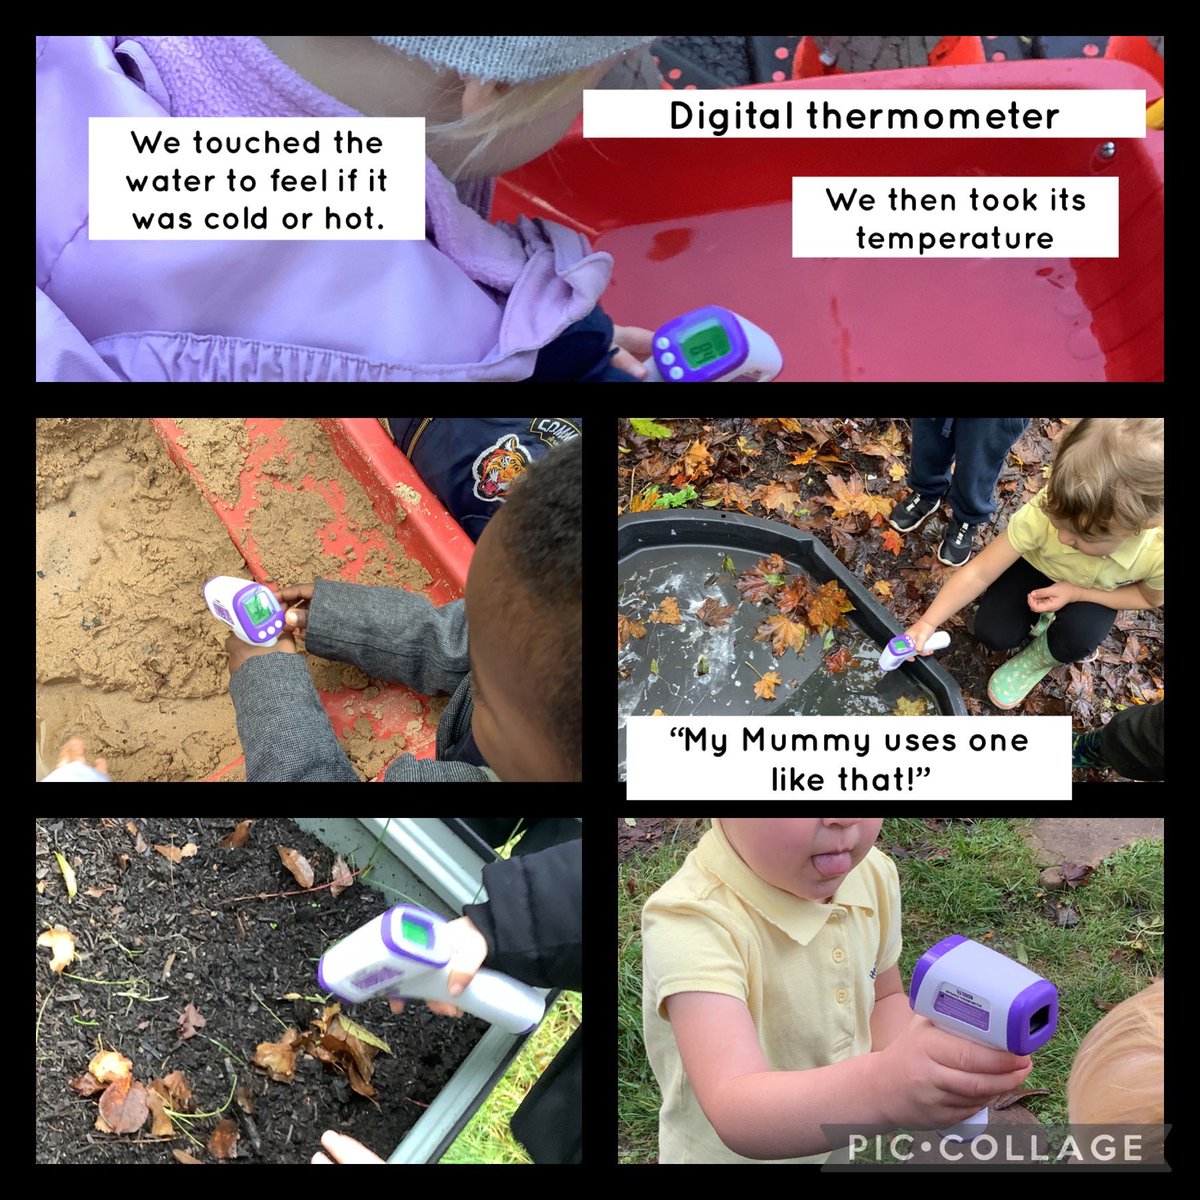 This week, nursery staff have been observing how children use digital resources in our setting. We are so proud of our learners’ confidence, engagement and persistence. #digitalcompetence